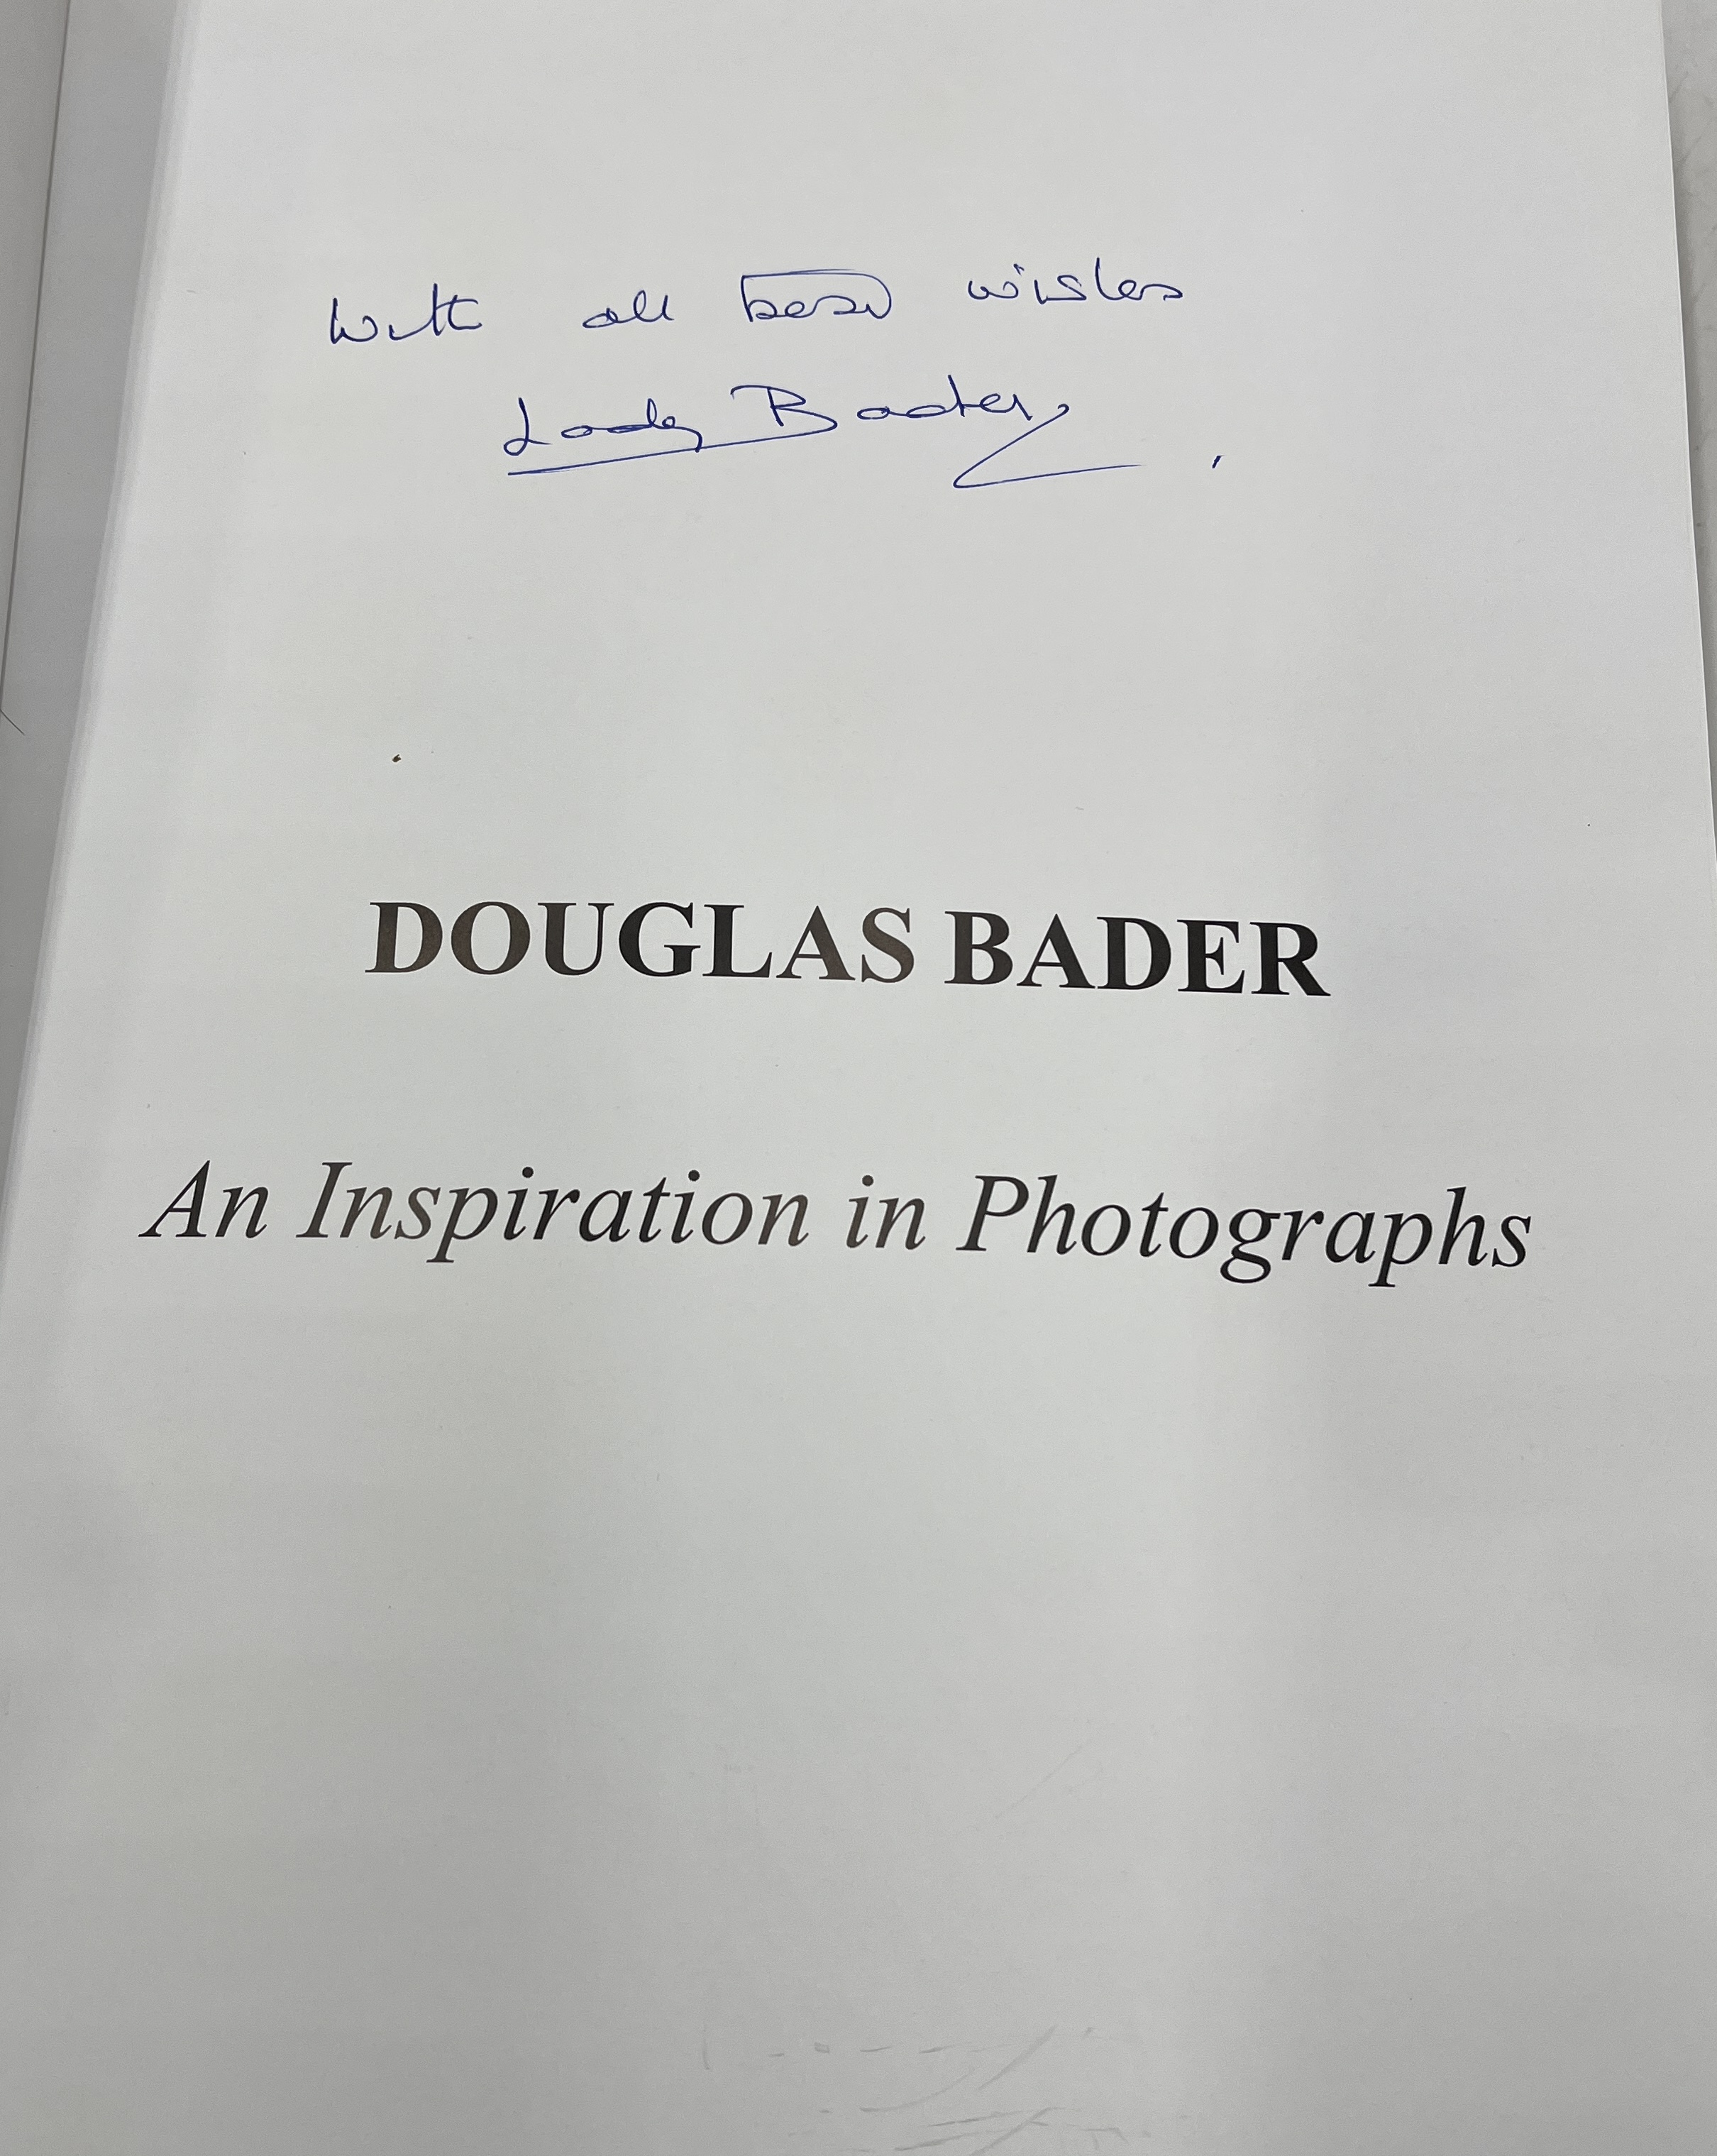 Group Captain Sir Douglas Bader - An Inspiration in Photographs by Dilip Sarkar, limited edition - Image 4 of 5